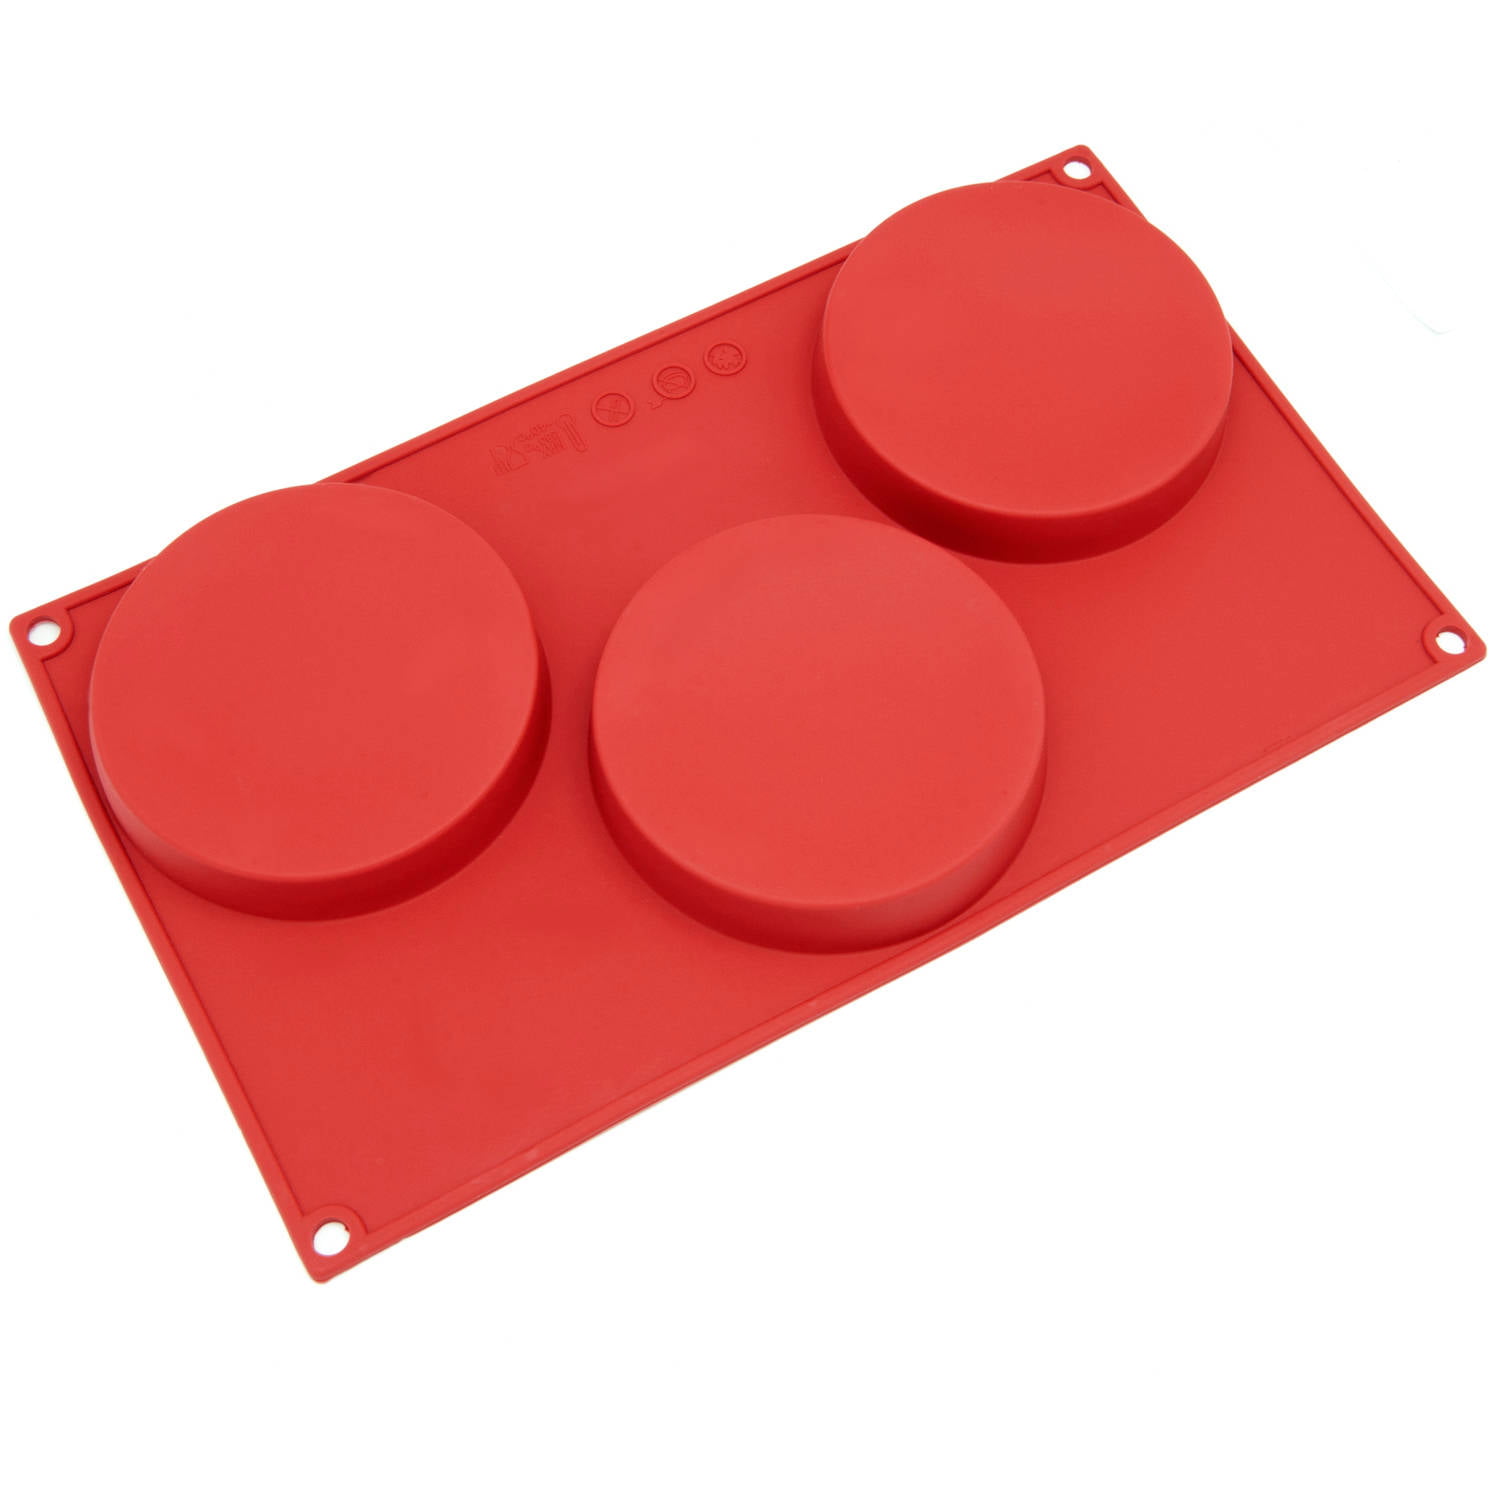 Details about   3-Cavity Silicone Cake Pie Custard Tart Resin Mold Bakeware Coaster Tray #sdc 